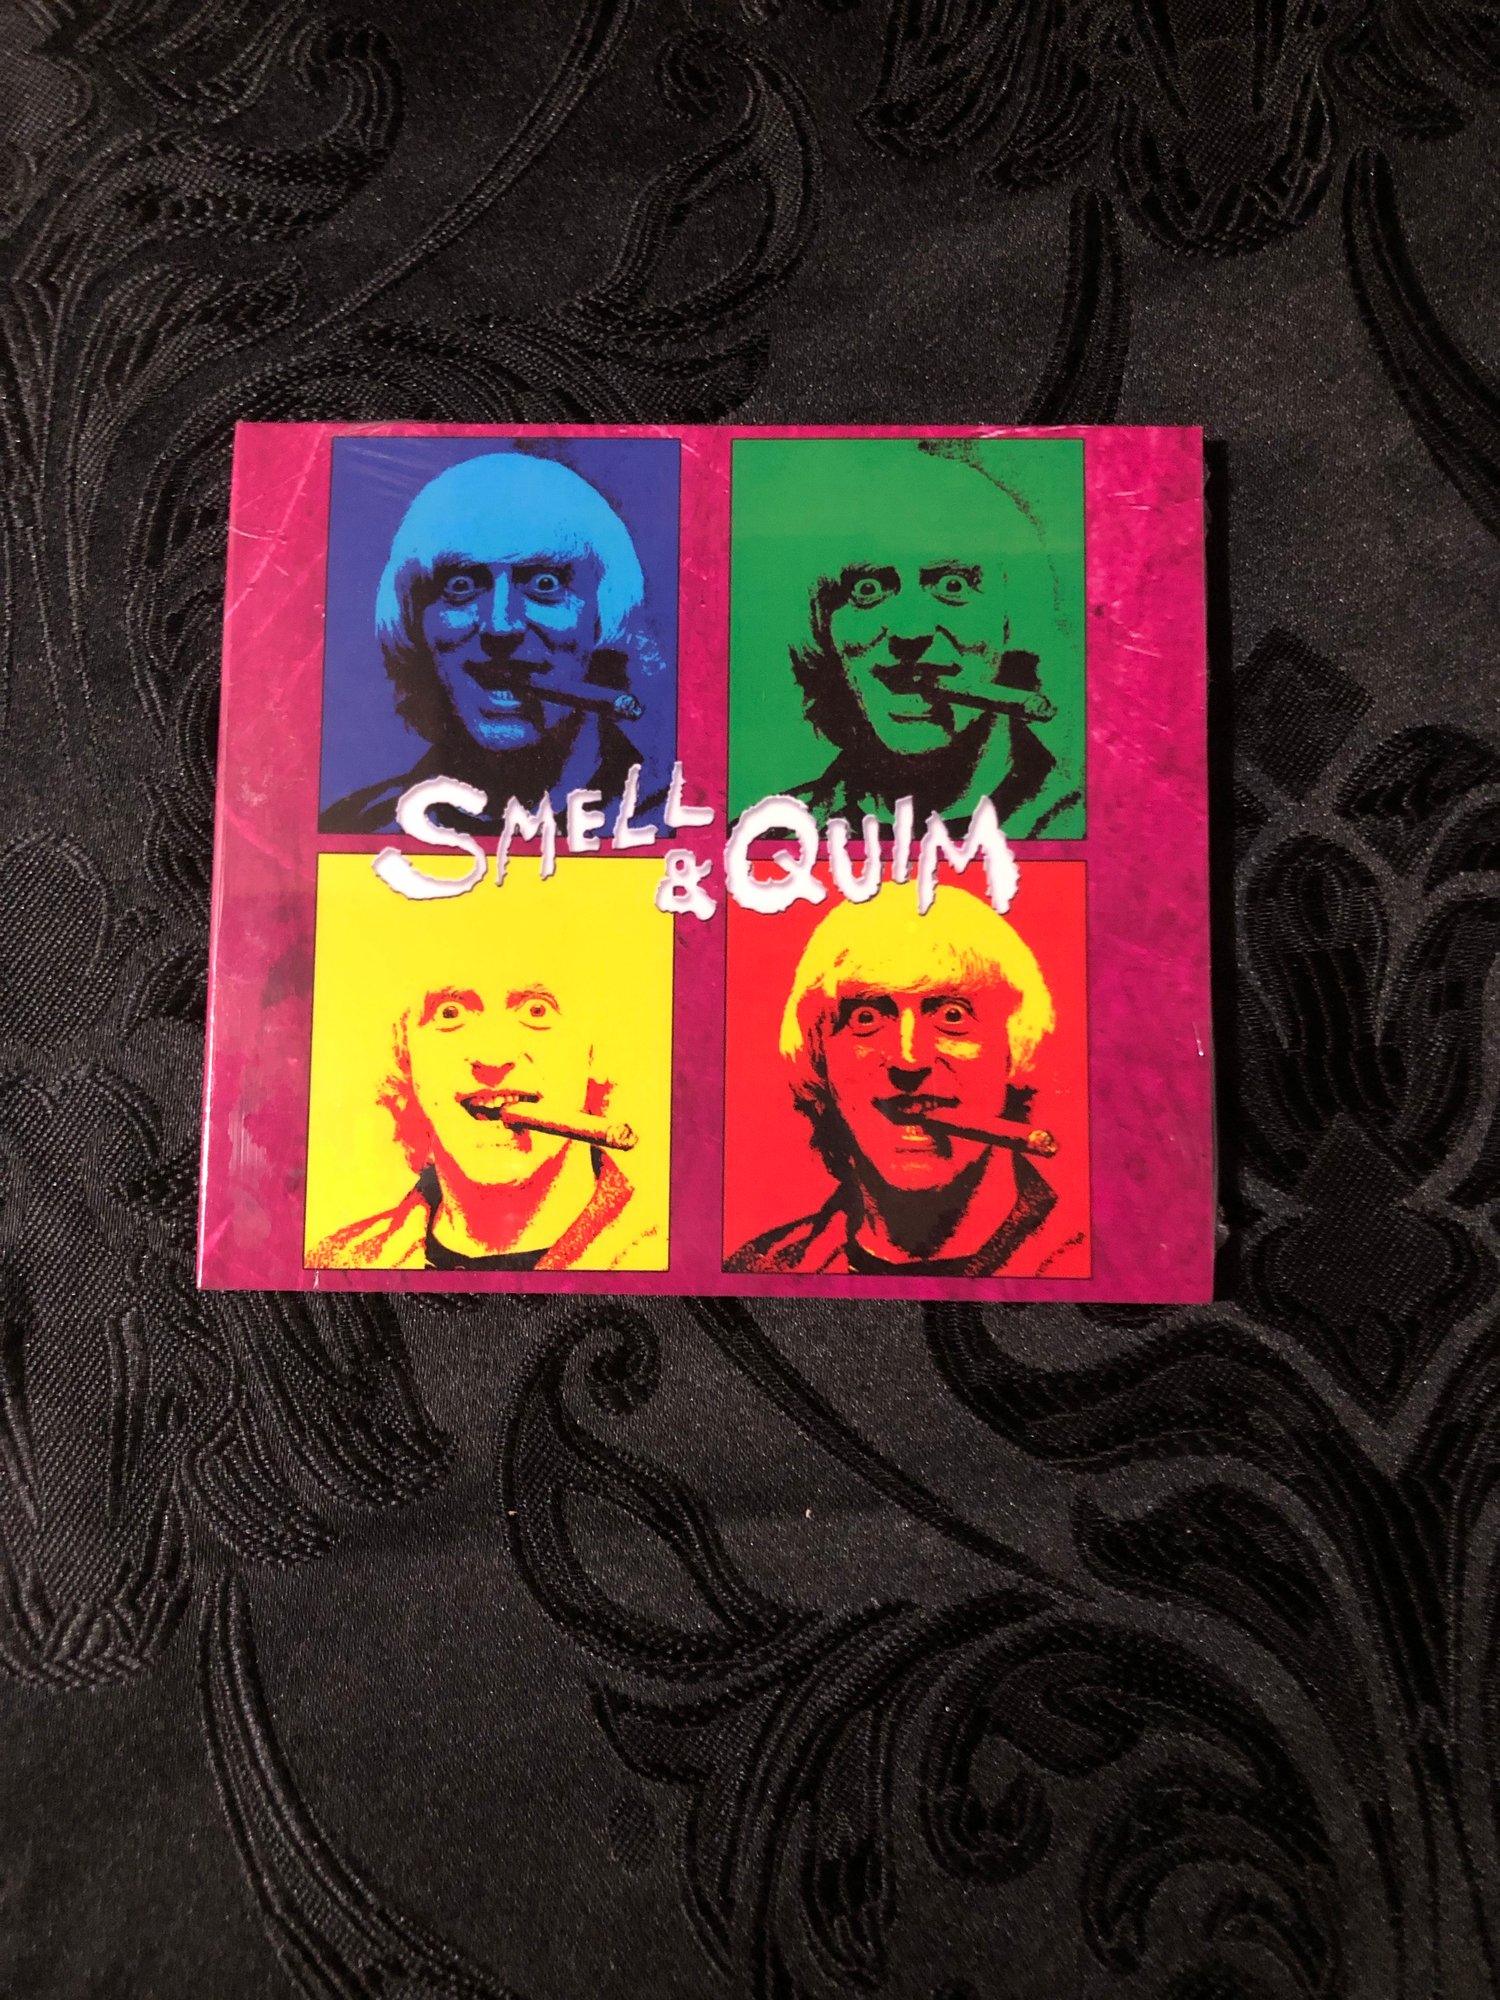 Smell & Quim - The English Method CD (Old Captain)